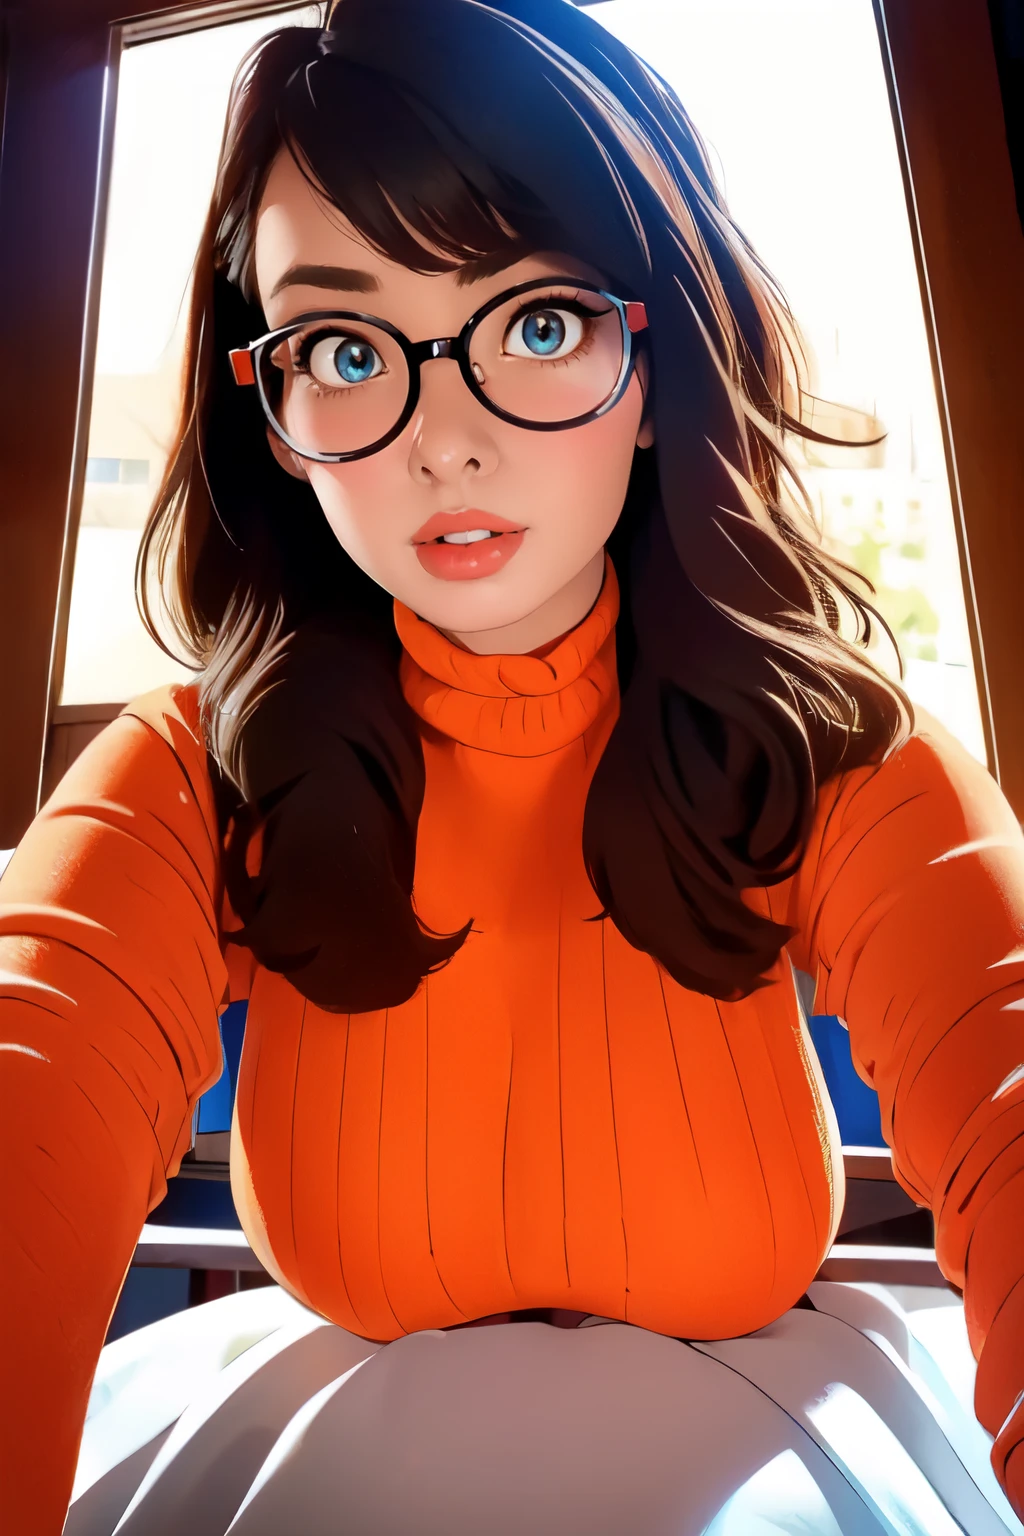 HD, 8k quality, masterpiece, Velma, dream girl huge , beautiful face, kissing lips, short bob hairstyle, long bangs, perfect makeup, realistic face, detailed eyes, blue eyes, brunette hair, eyelashes, smile grin, bedroom, sitting on bed, showing cameltoe, eyes at viewer, orange knitted turtle neck sweater, clear lens glasses, red school girl skirt, view from below,